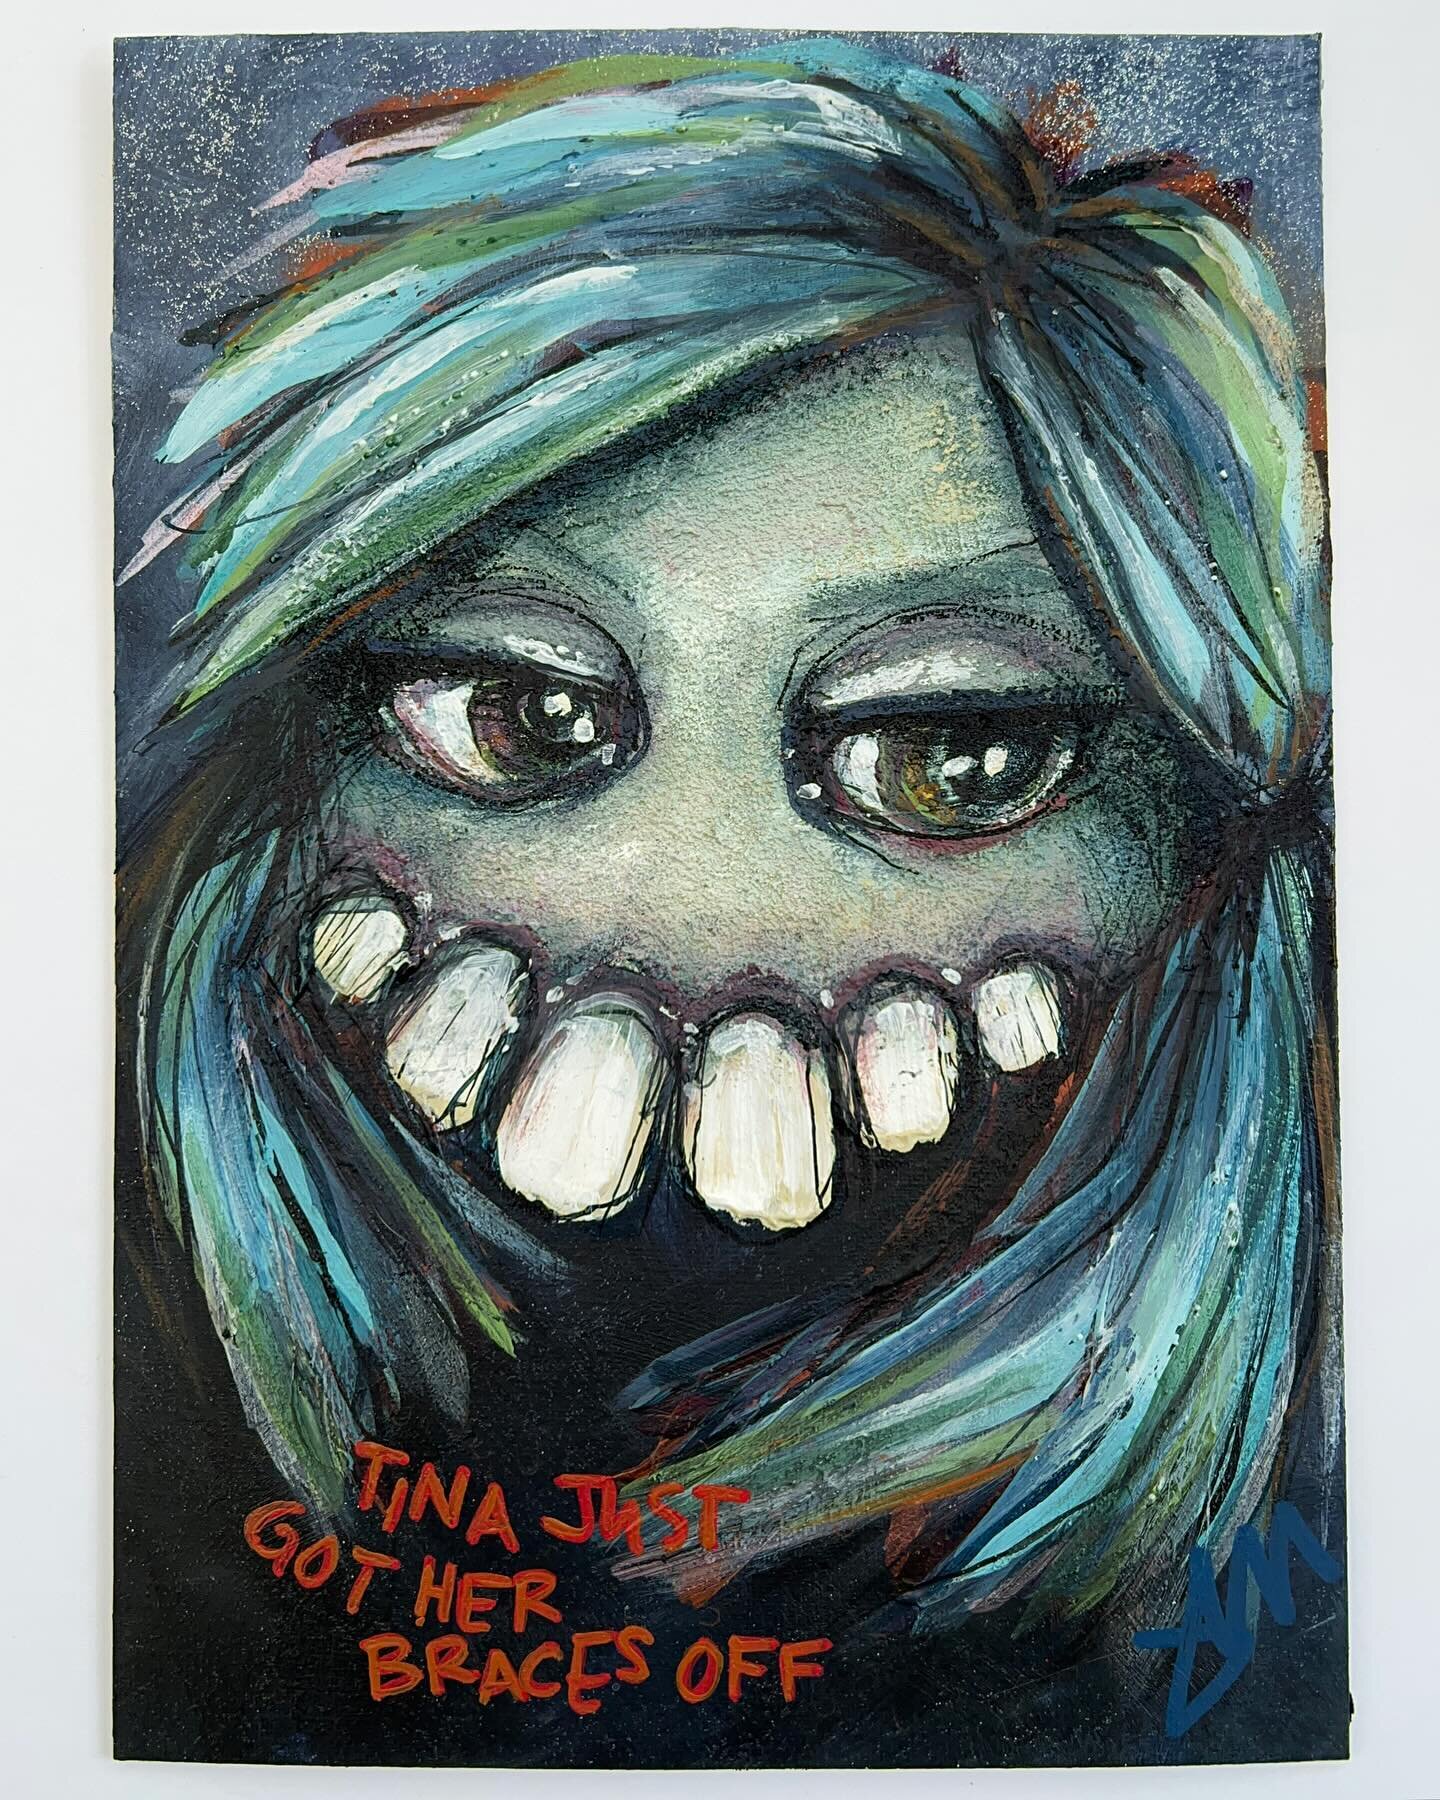 ✨Looking good, Tina!✨ &ldquo;Tina Just Got Her Braces Off&rdquo; acrylic with texture mediums, plus a little acrylic ink for the fine lines, on acrylic artboard, A4.
I have been having so much fun experimenting with how to create my creepy - often to